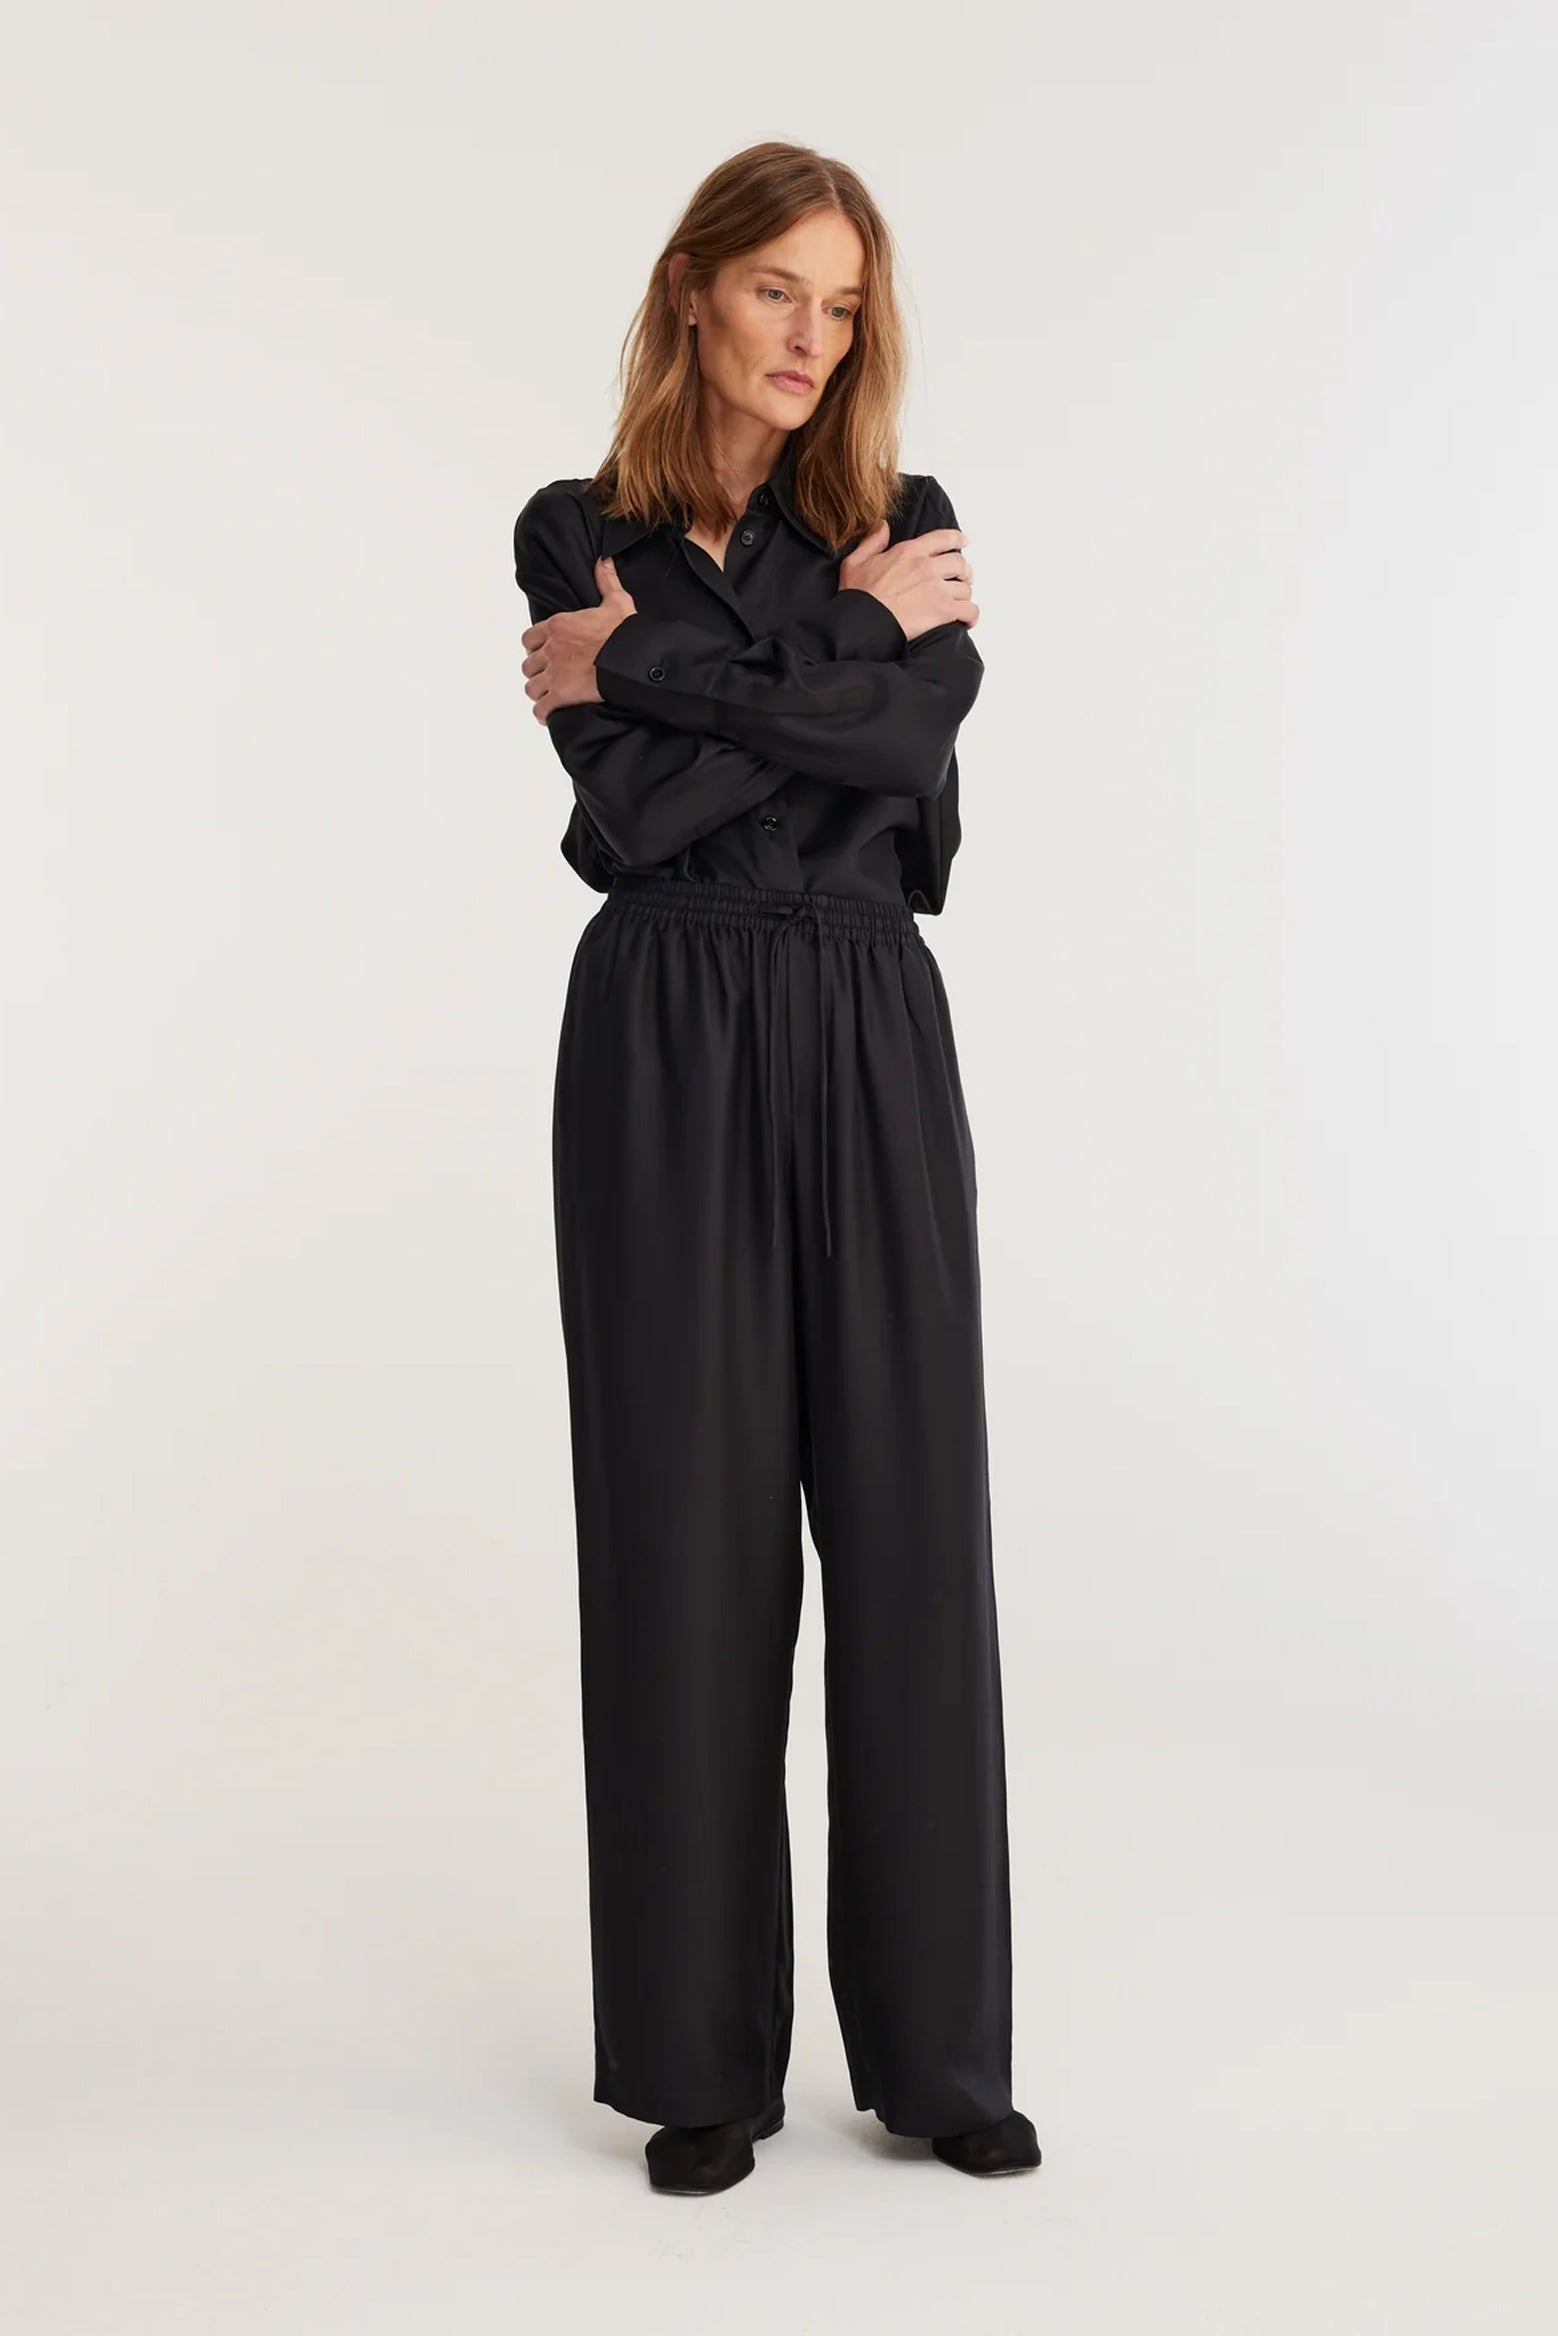 Rohe Wide Leg Silk Trouser in Noir available at The New Trend Australia.